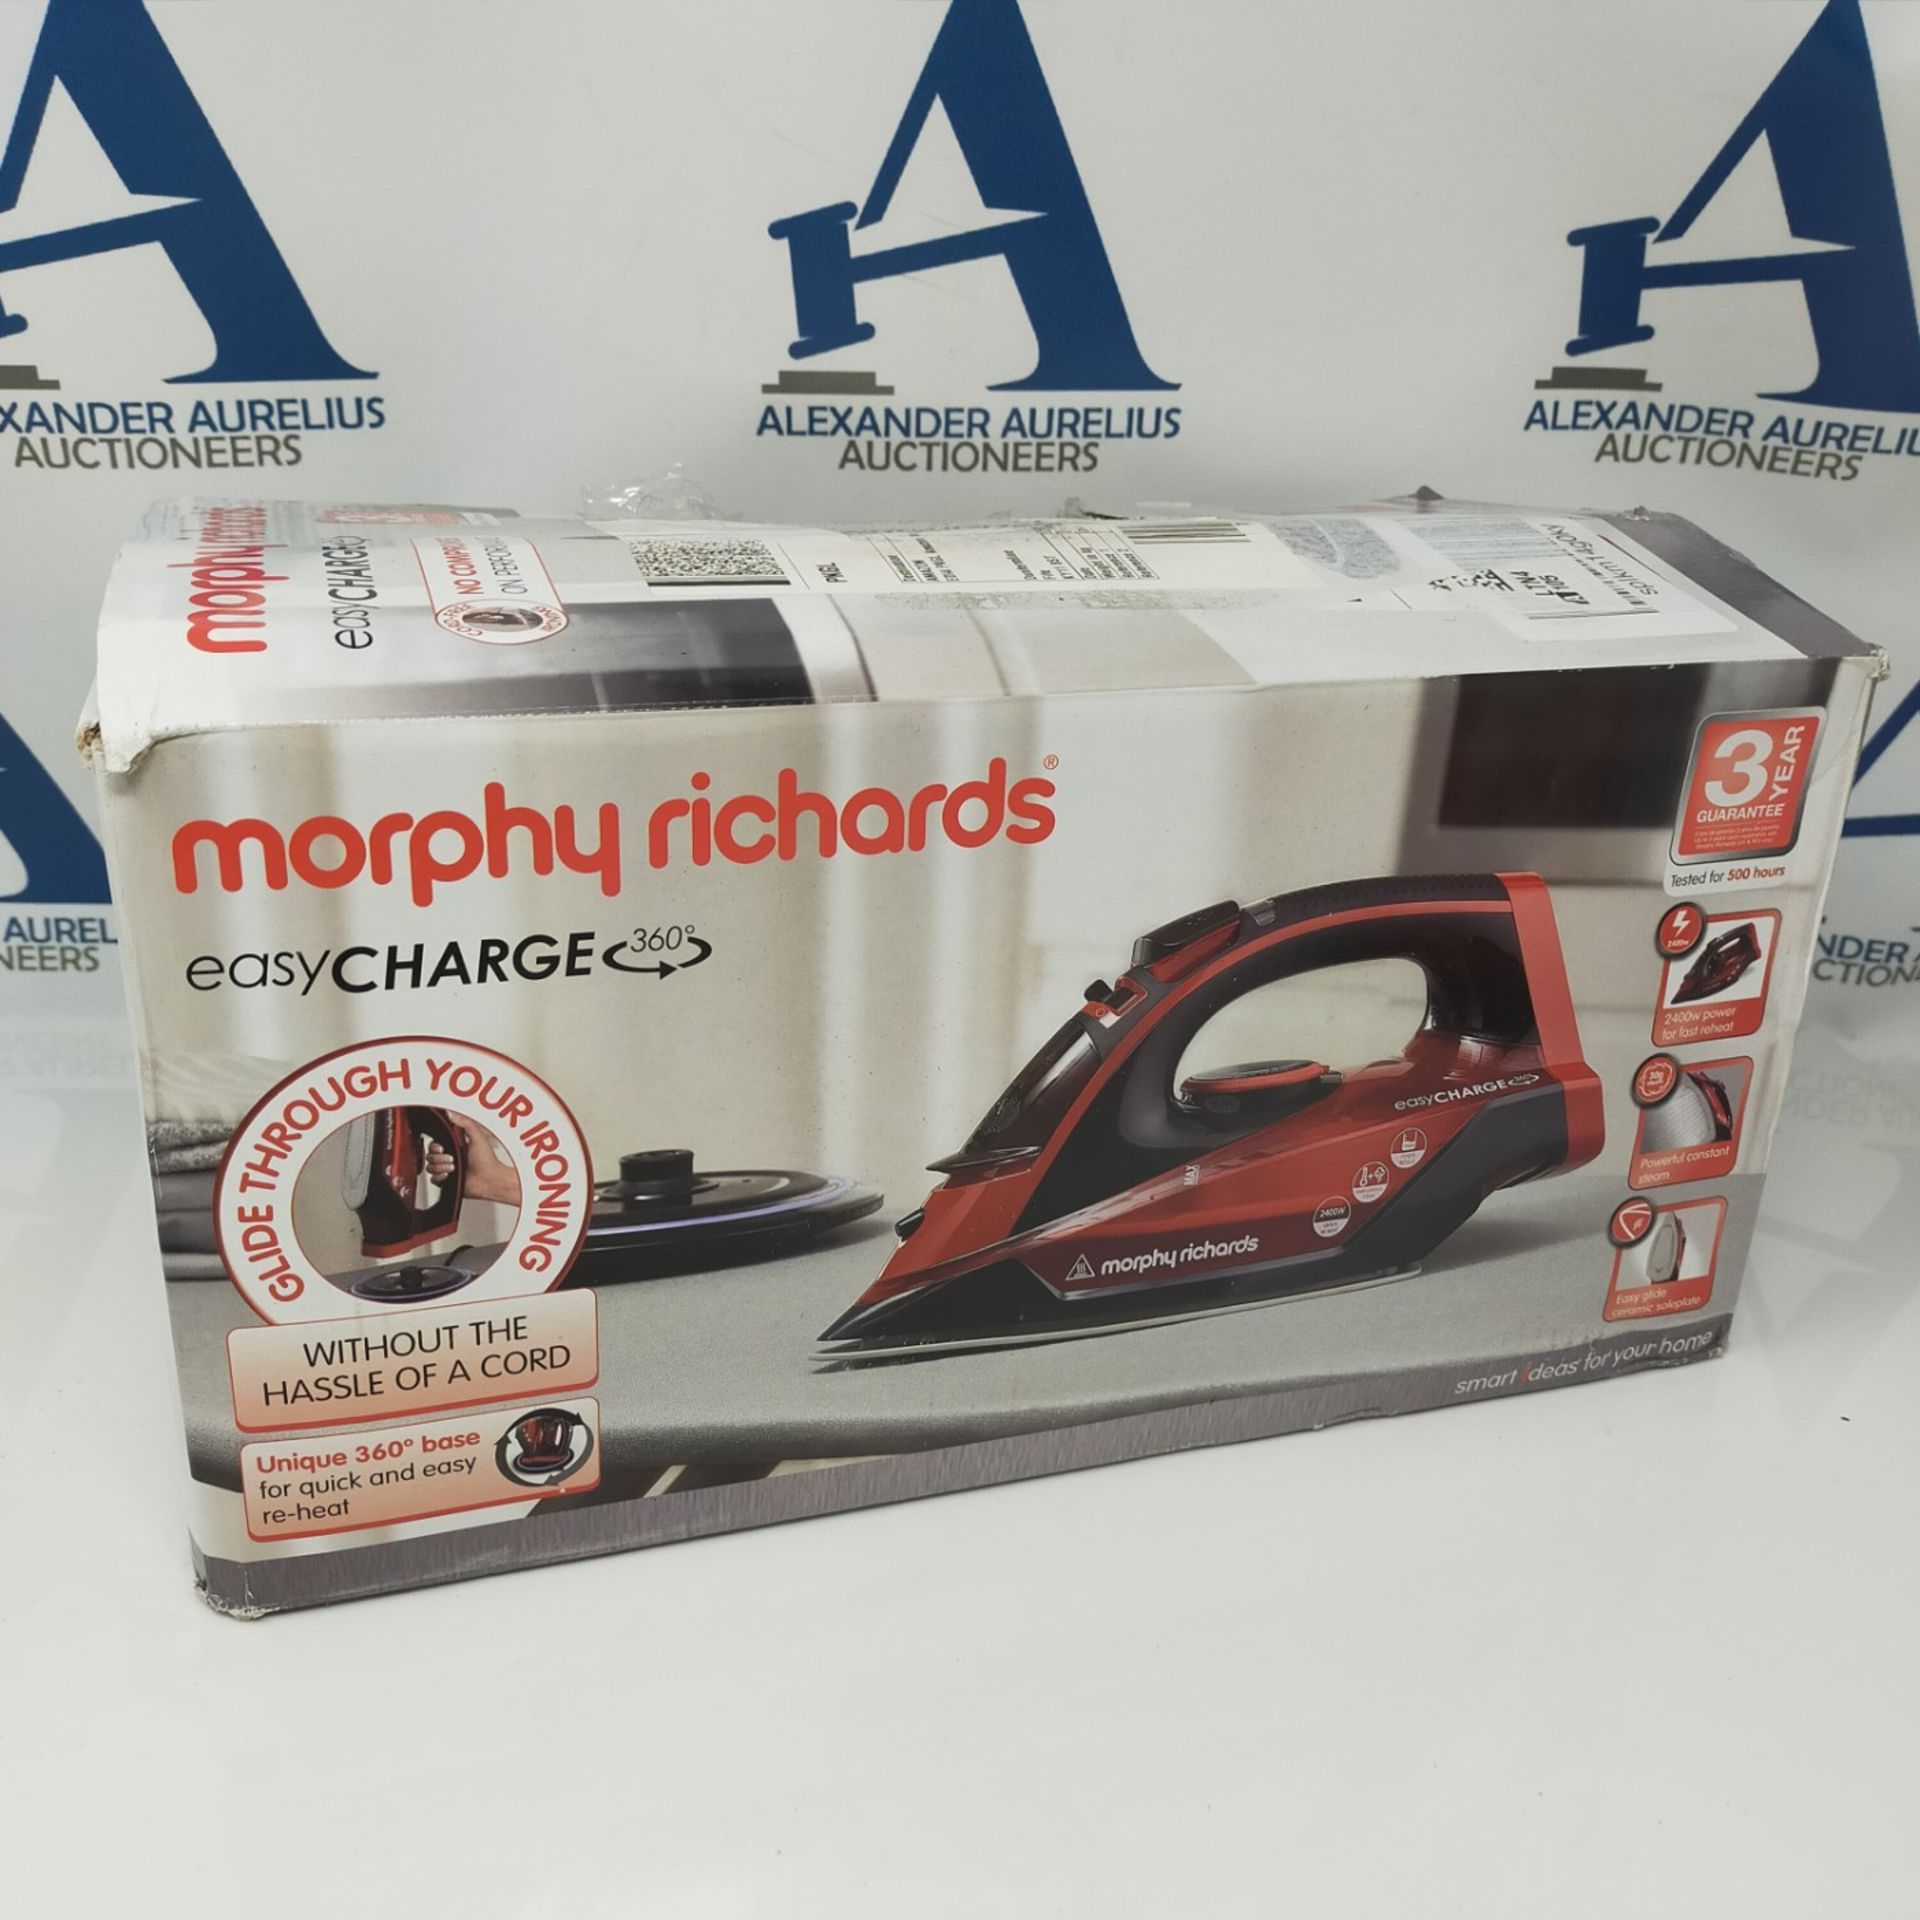 Morphy Richards 303250 Cordless Steam Iron easyCHARGE 360 Cord-Free, 2400 W, Red/Black - Image 2 of 3